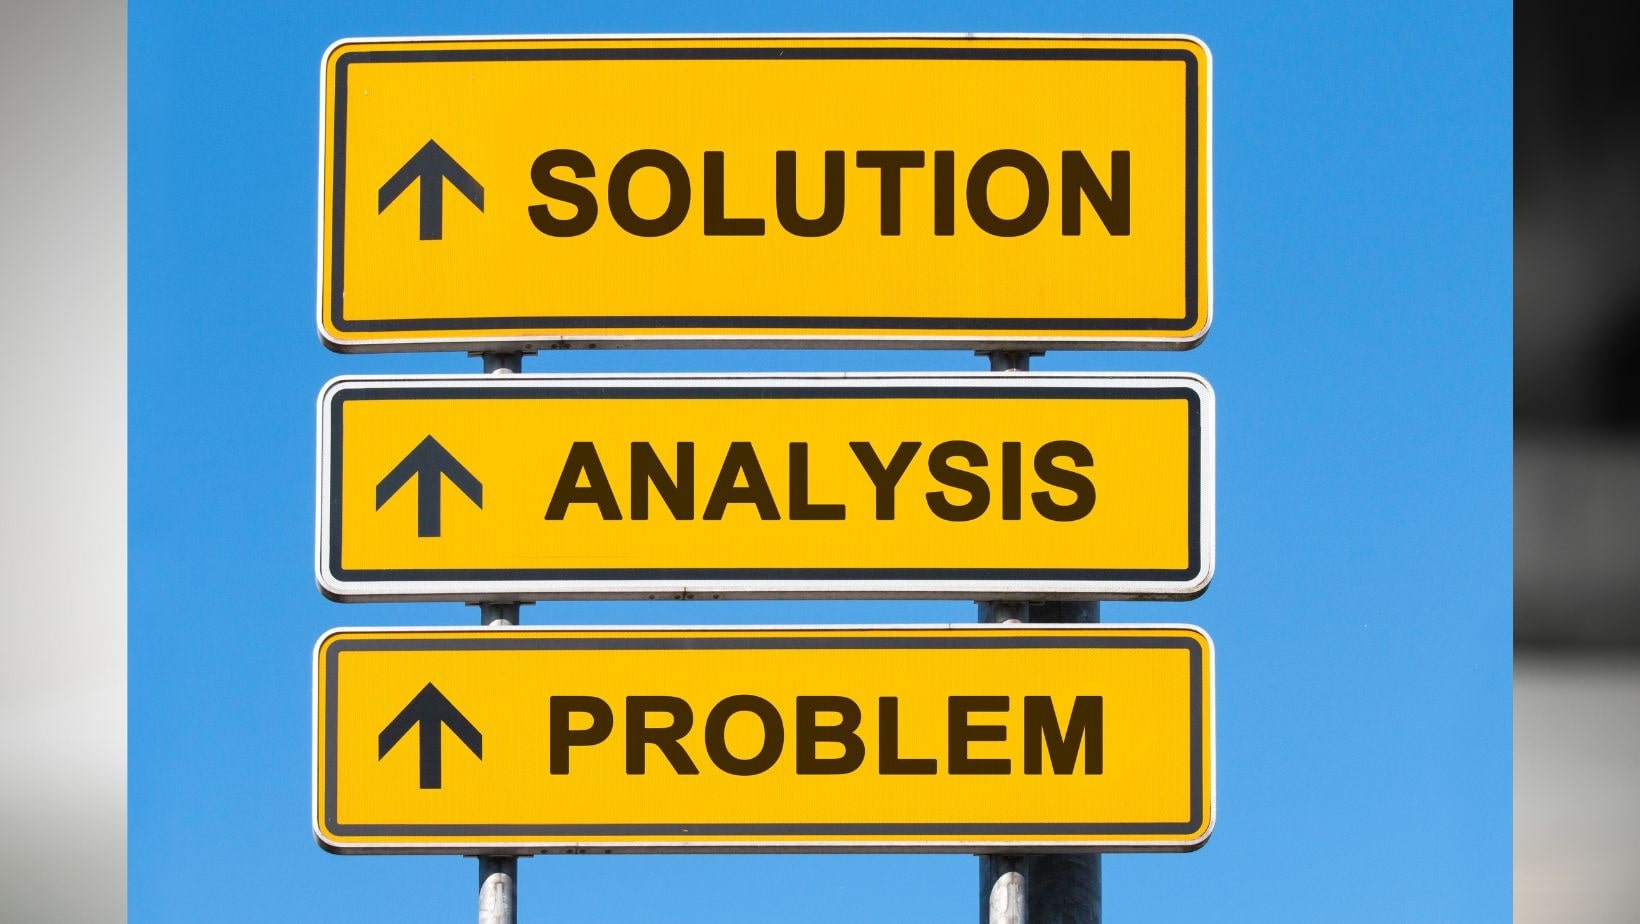 Problem-Solving and Analytical Skills-3 yellow signs with solution, analysis and problem printed on